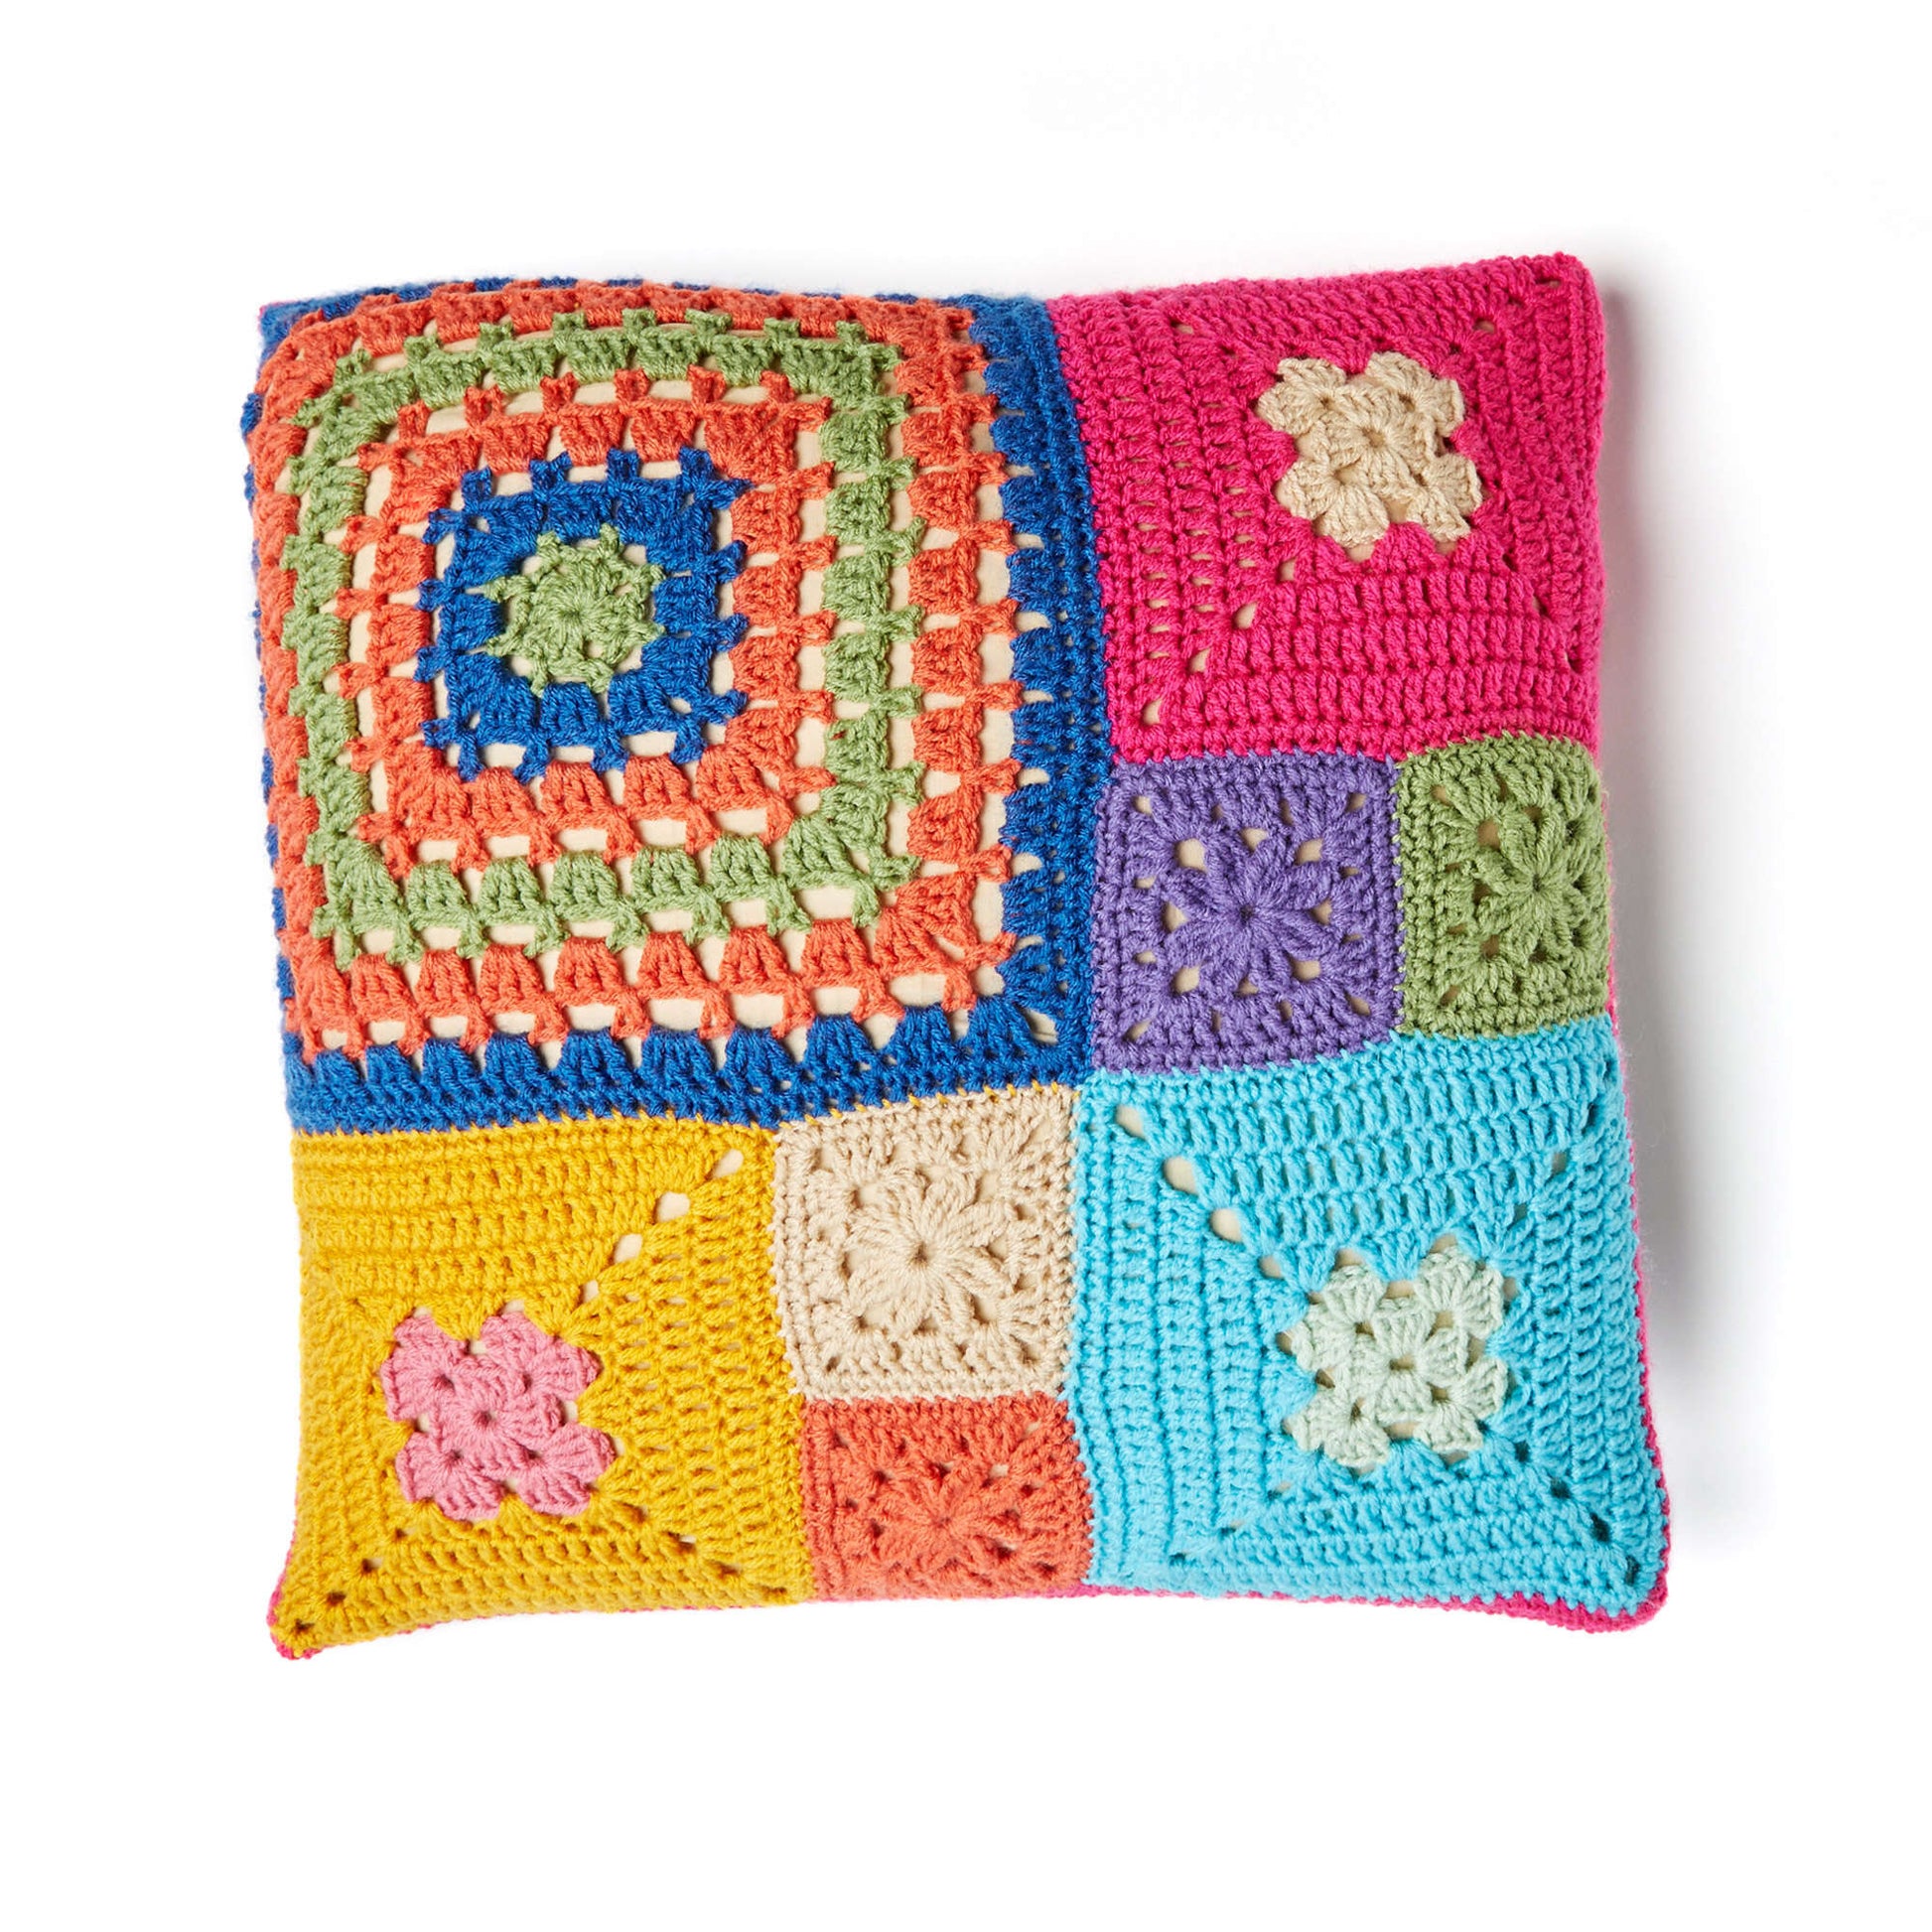 Free Red Heart Patched Persuasion Pillows Crochet Pattern